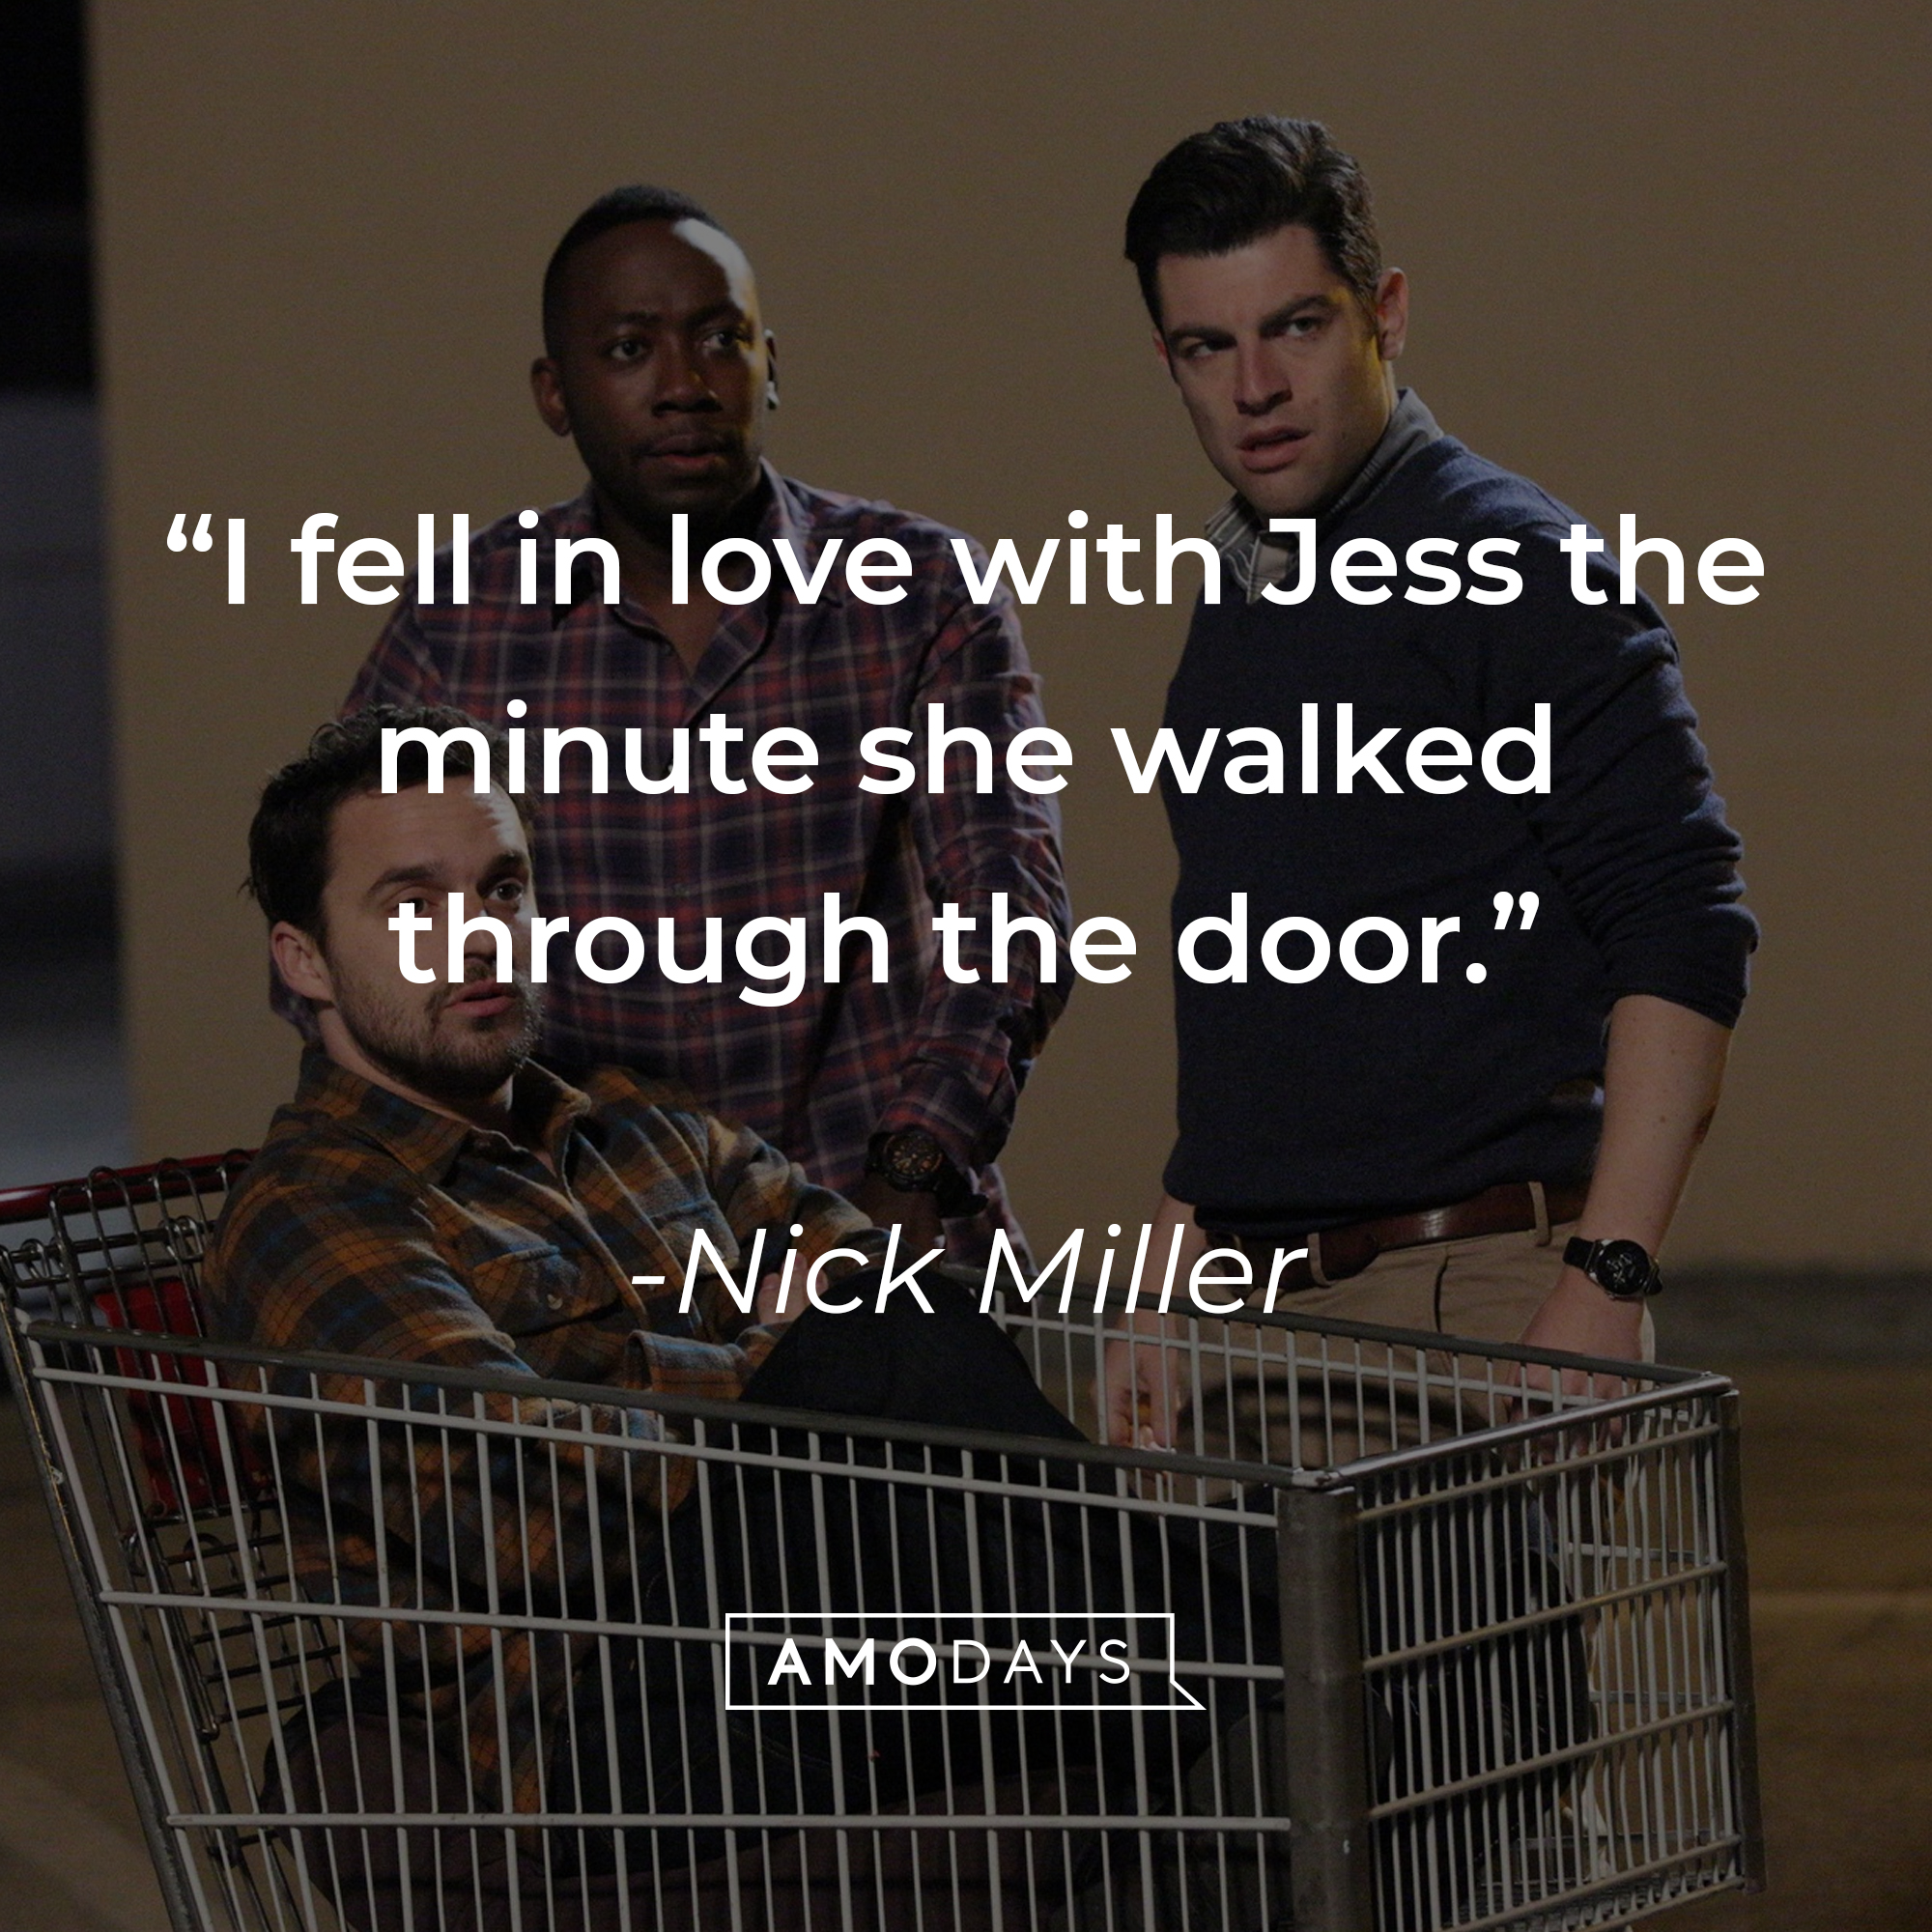 Nick Miller, Schmidt, and Winston Bishop,  with Miller’s quote: “I fell in love with Jess the minute she walked through the door.” | Source: facebook.com/OfficialNewGirl